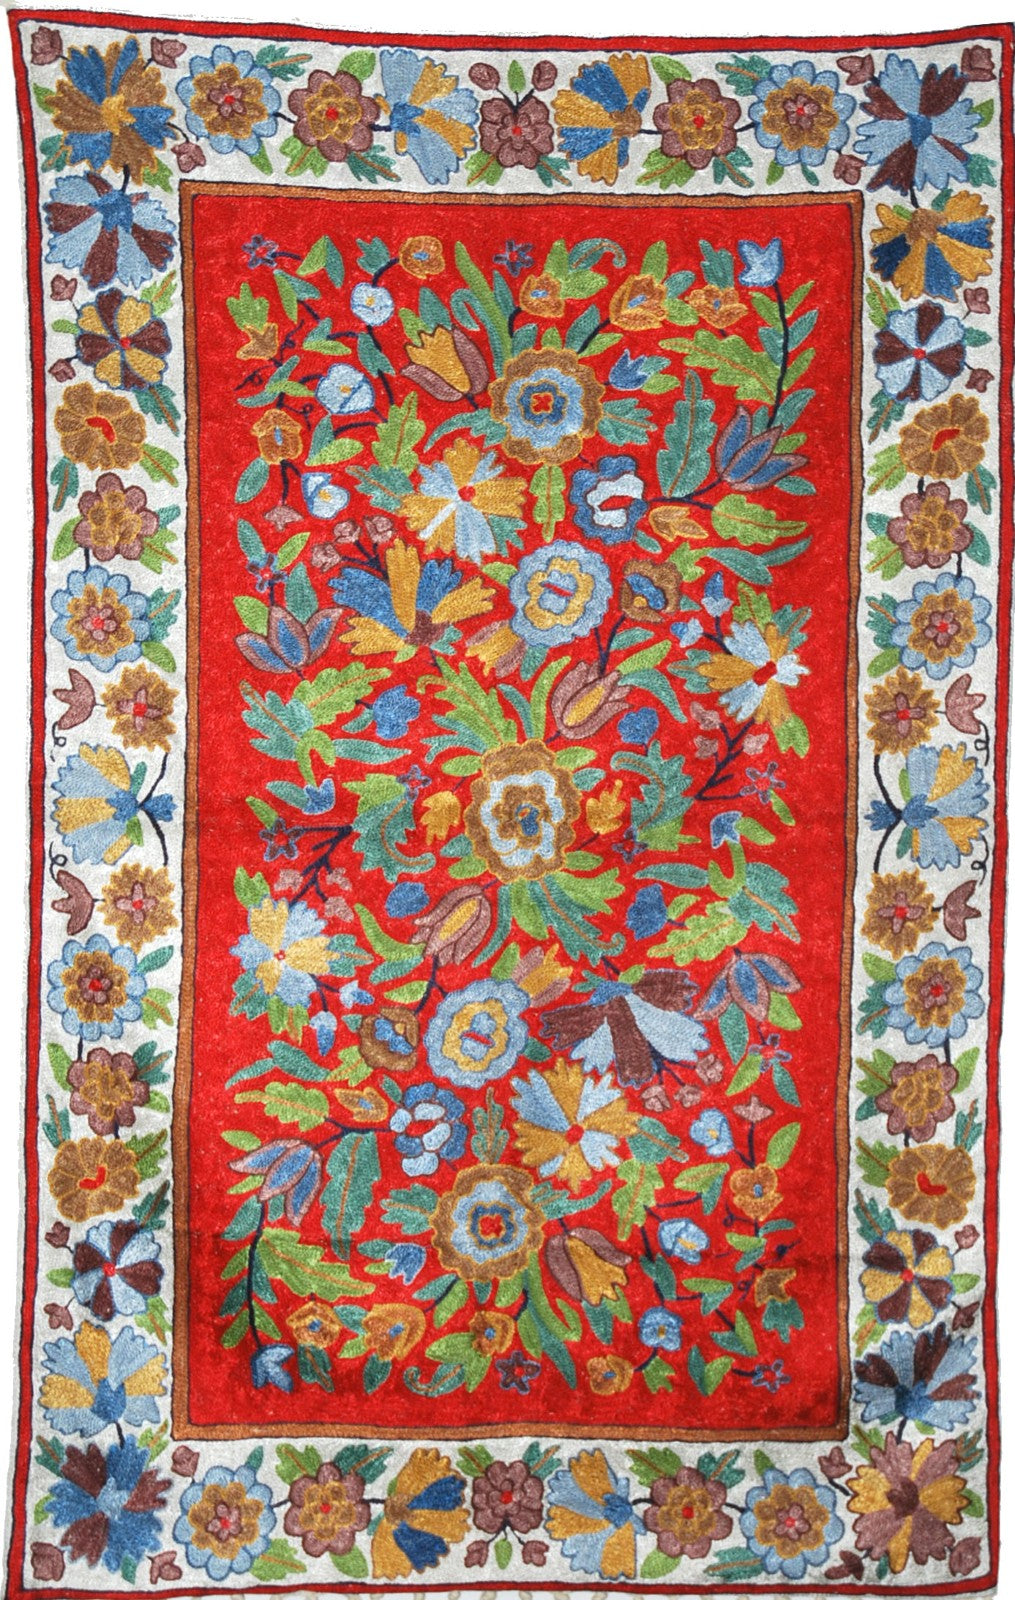 ChainStitch Tapestry Silk Area Rug, Multicolor Embroidery 2.5x4 feet #CWR10104